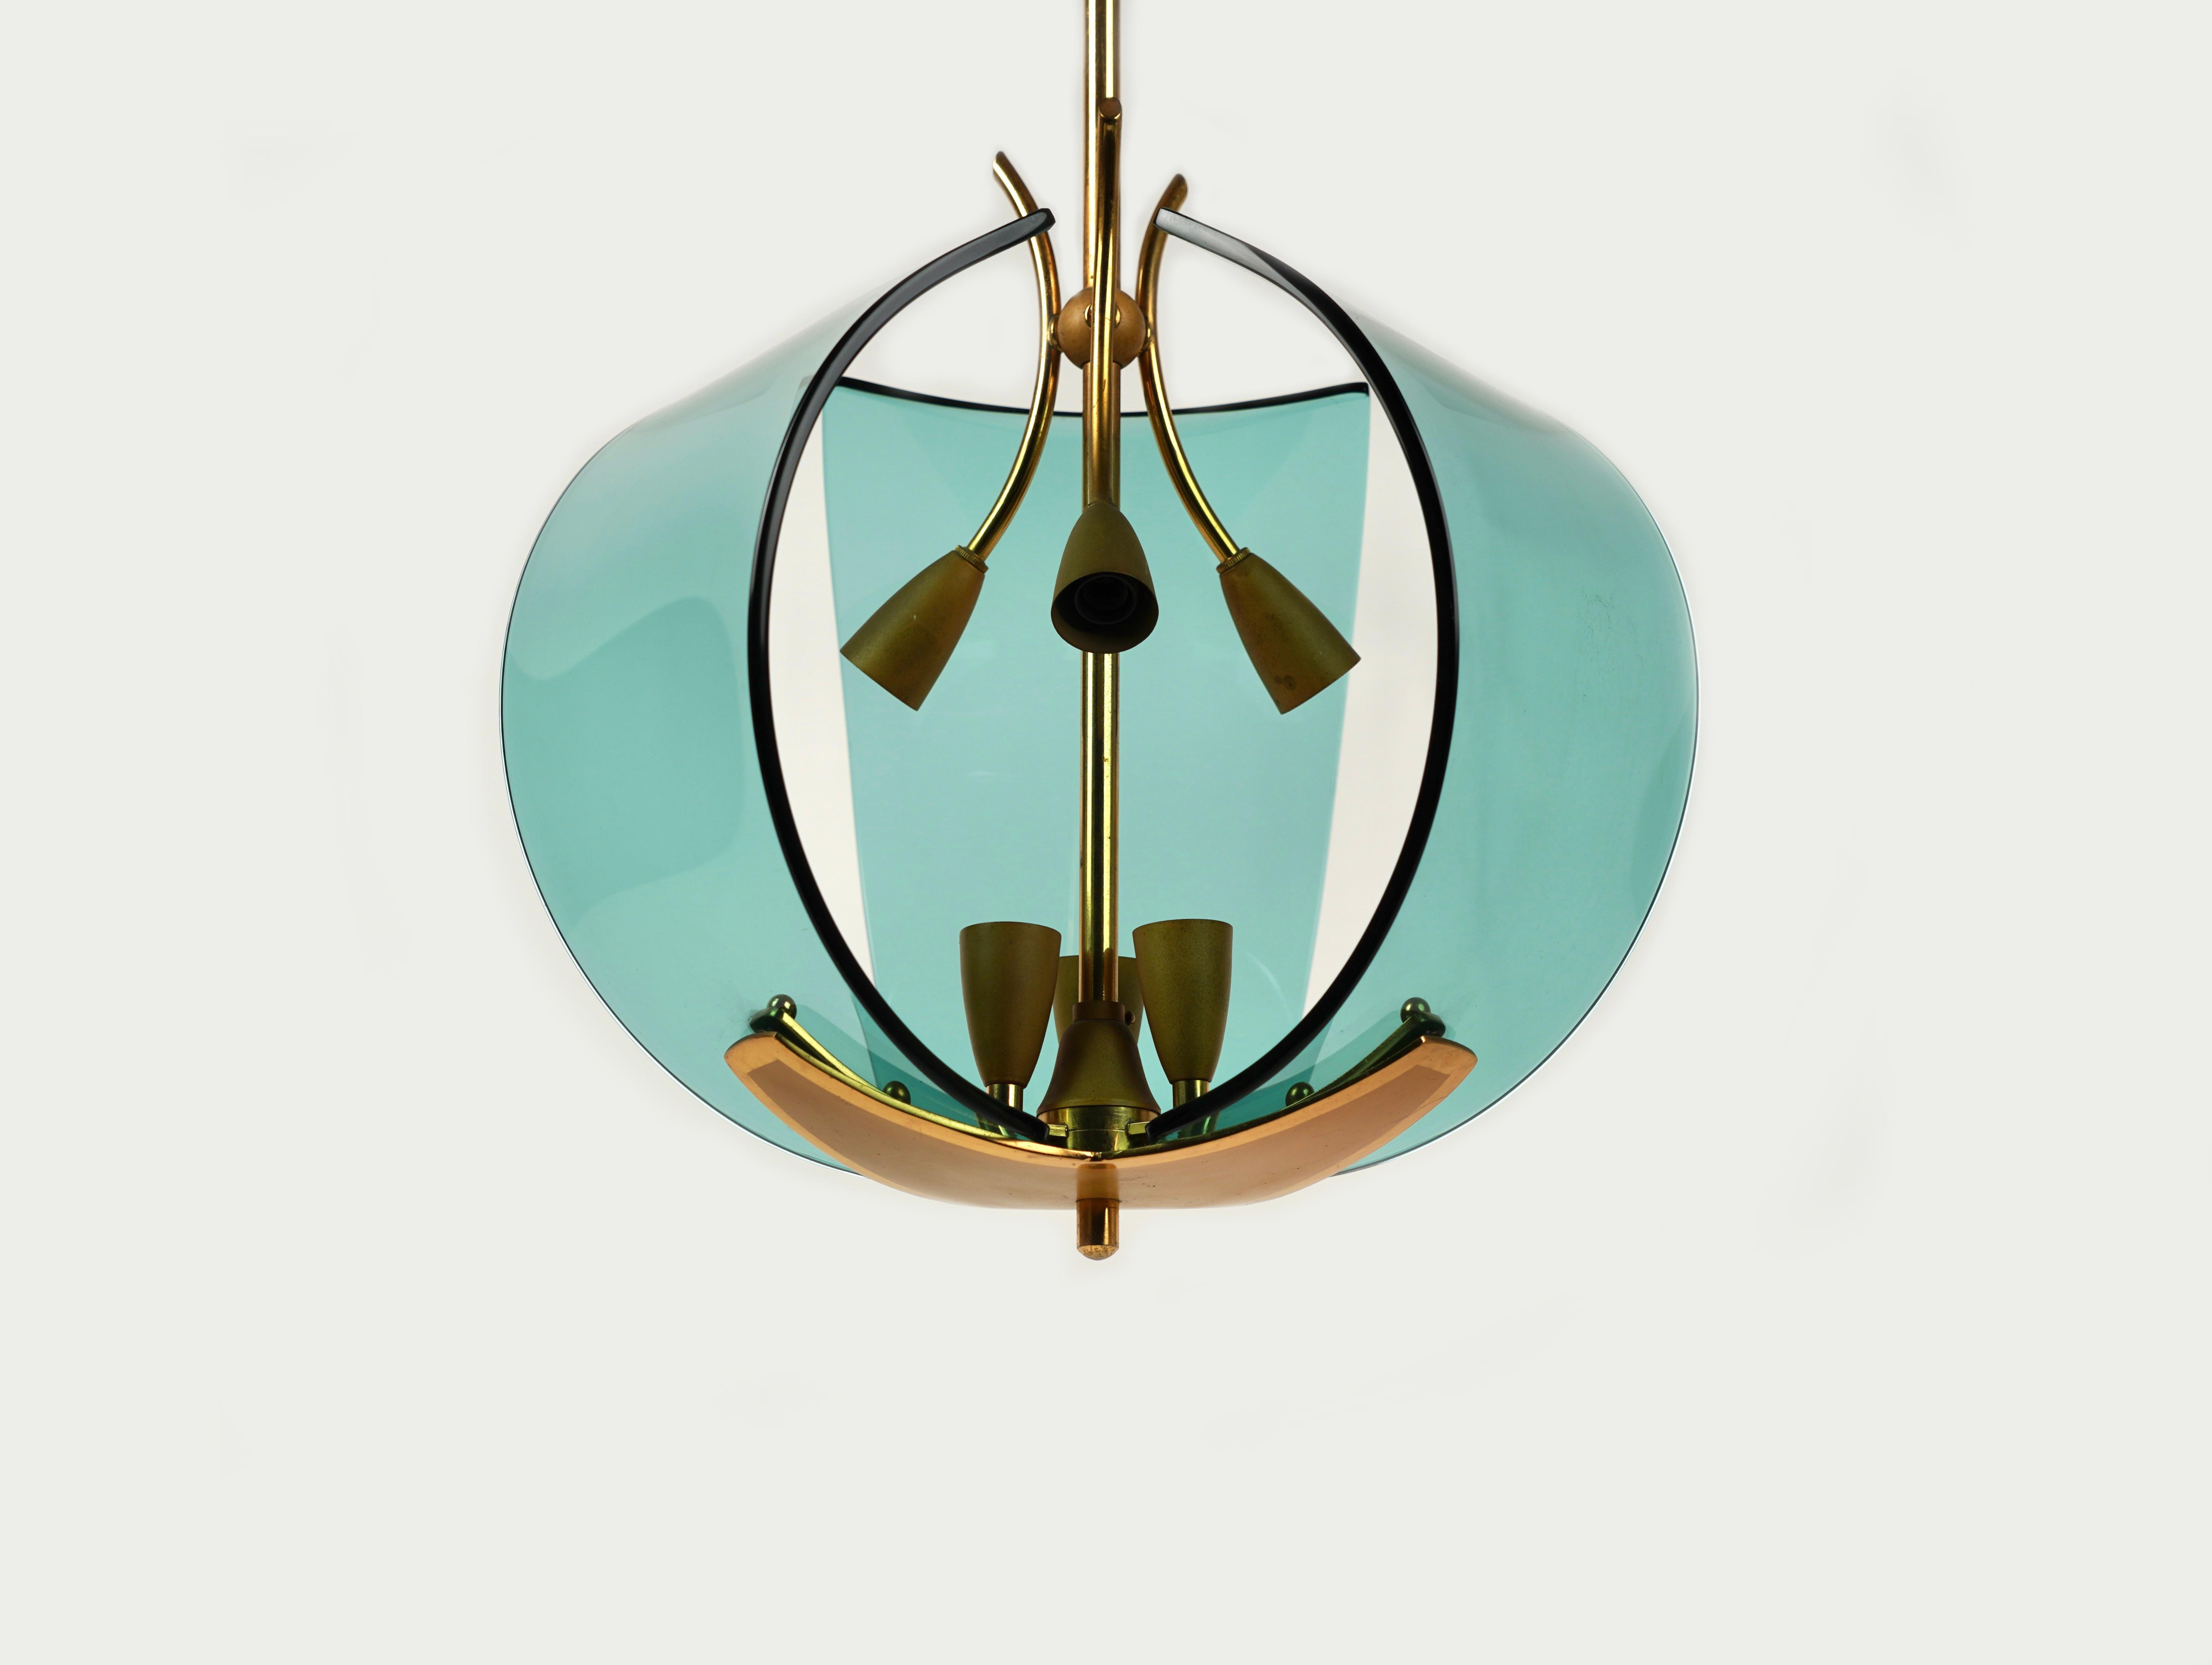 Mid-20th Century Midcentury Chandelier in Brass and Glass by Fontana Arte, Italy, 1950s For Sale